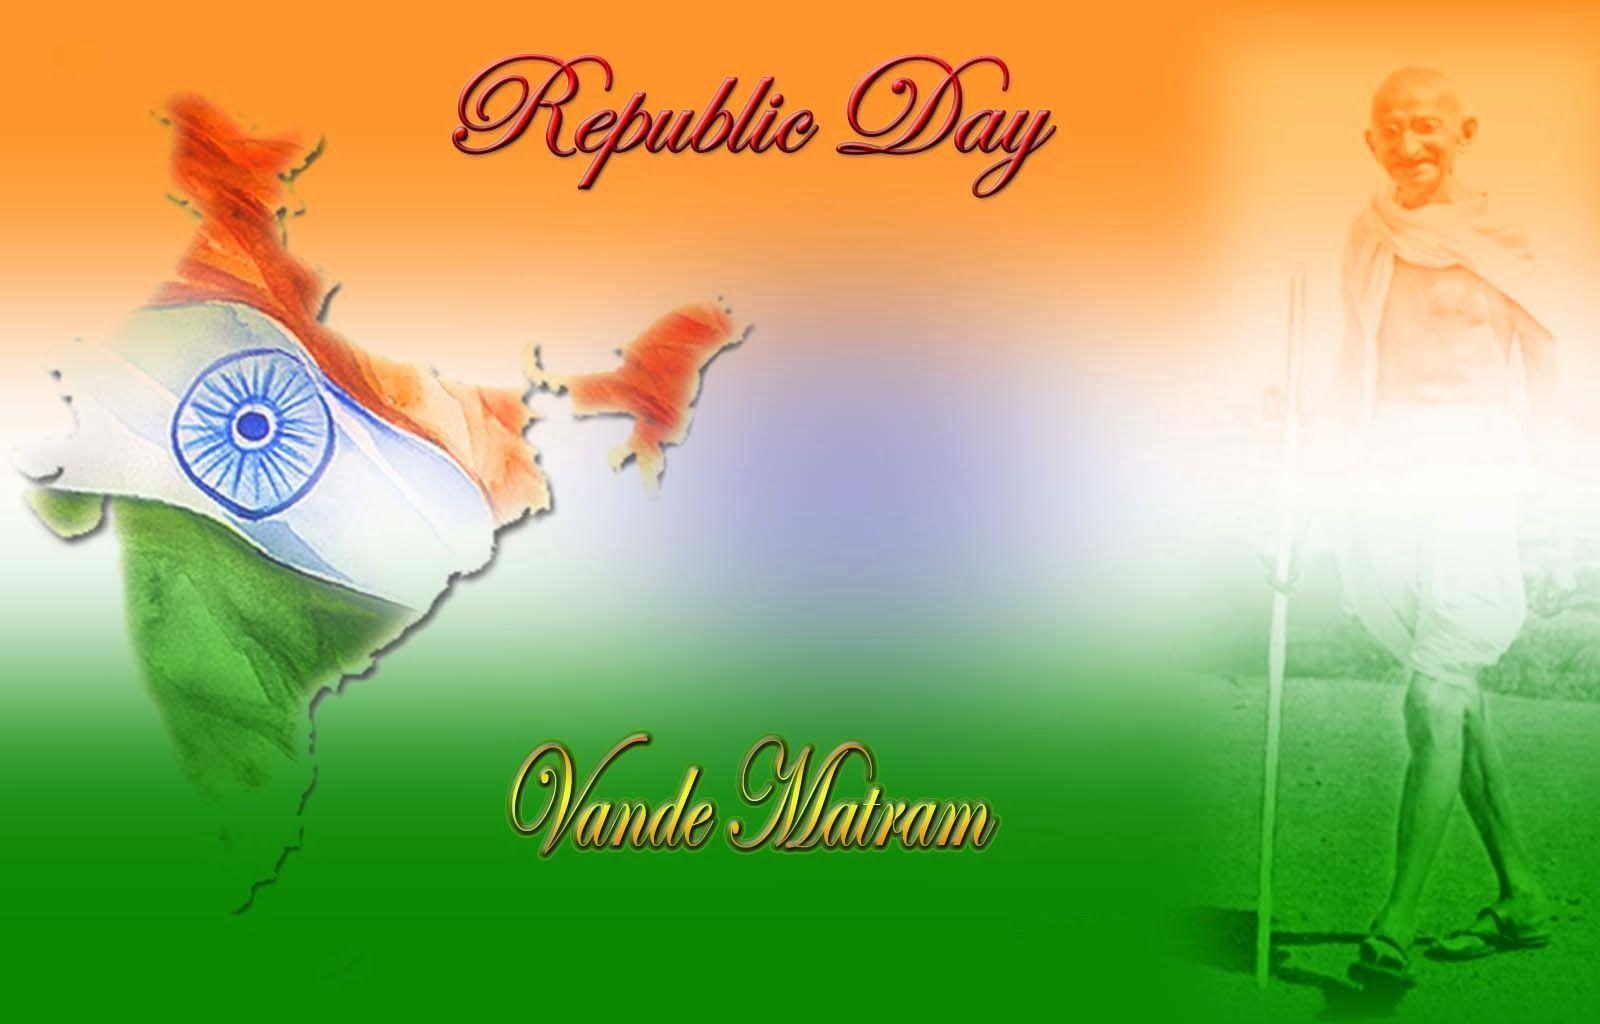 Download free republic day 2015 wallpaper, image &picture